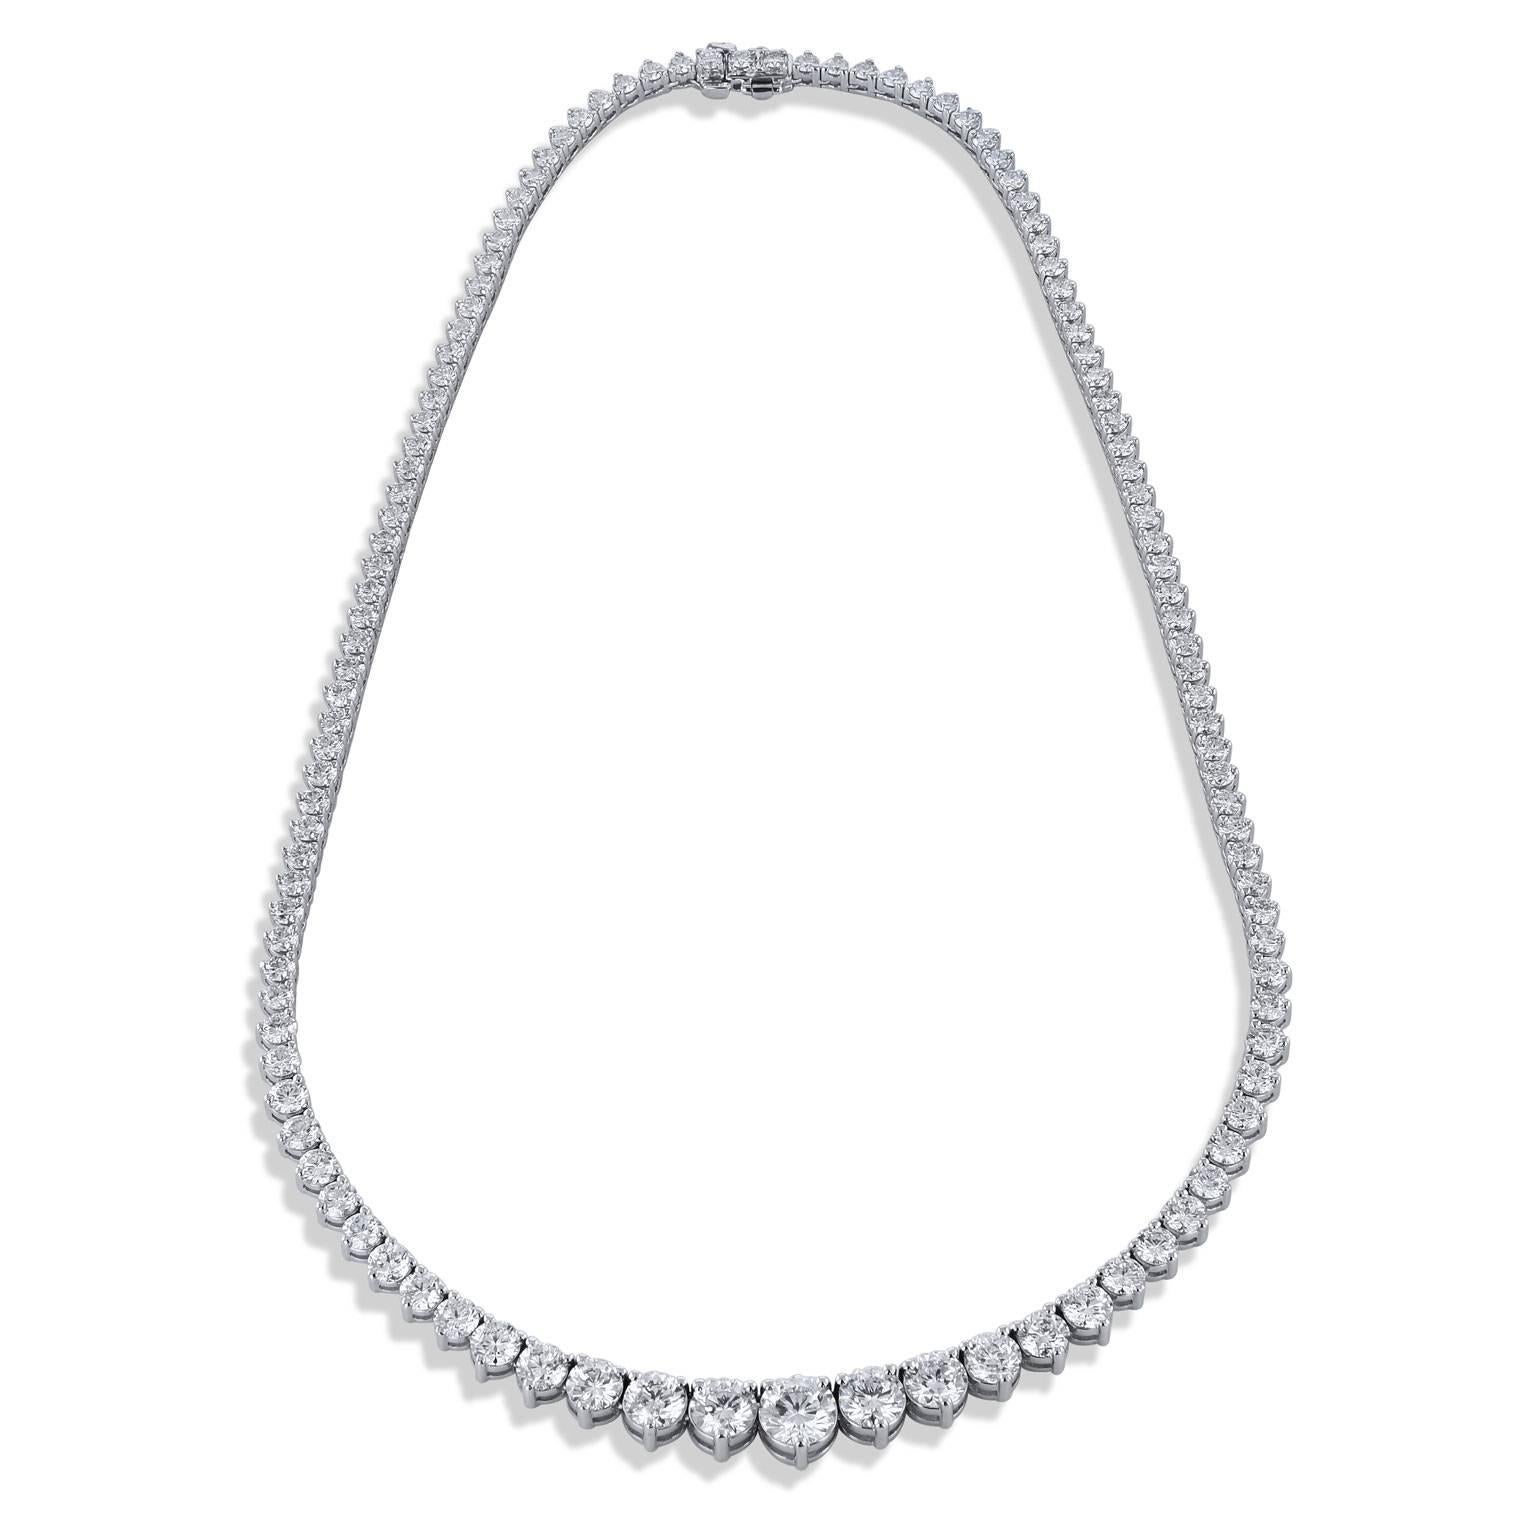 Drop into a scene of elegance with this three-prong set graduated row of round brilliant-cut diamonds that sparkle as they grow in size toward the center 1.14 carat diamond (F/WS1) in this handmade Riviera necklace. Fashioned in 18 karat white gold,